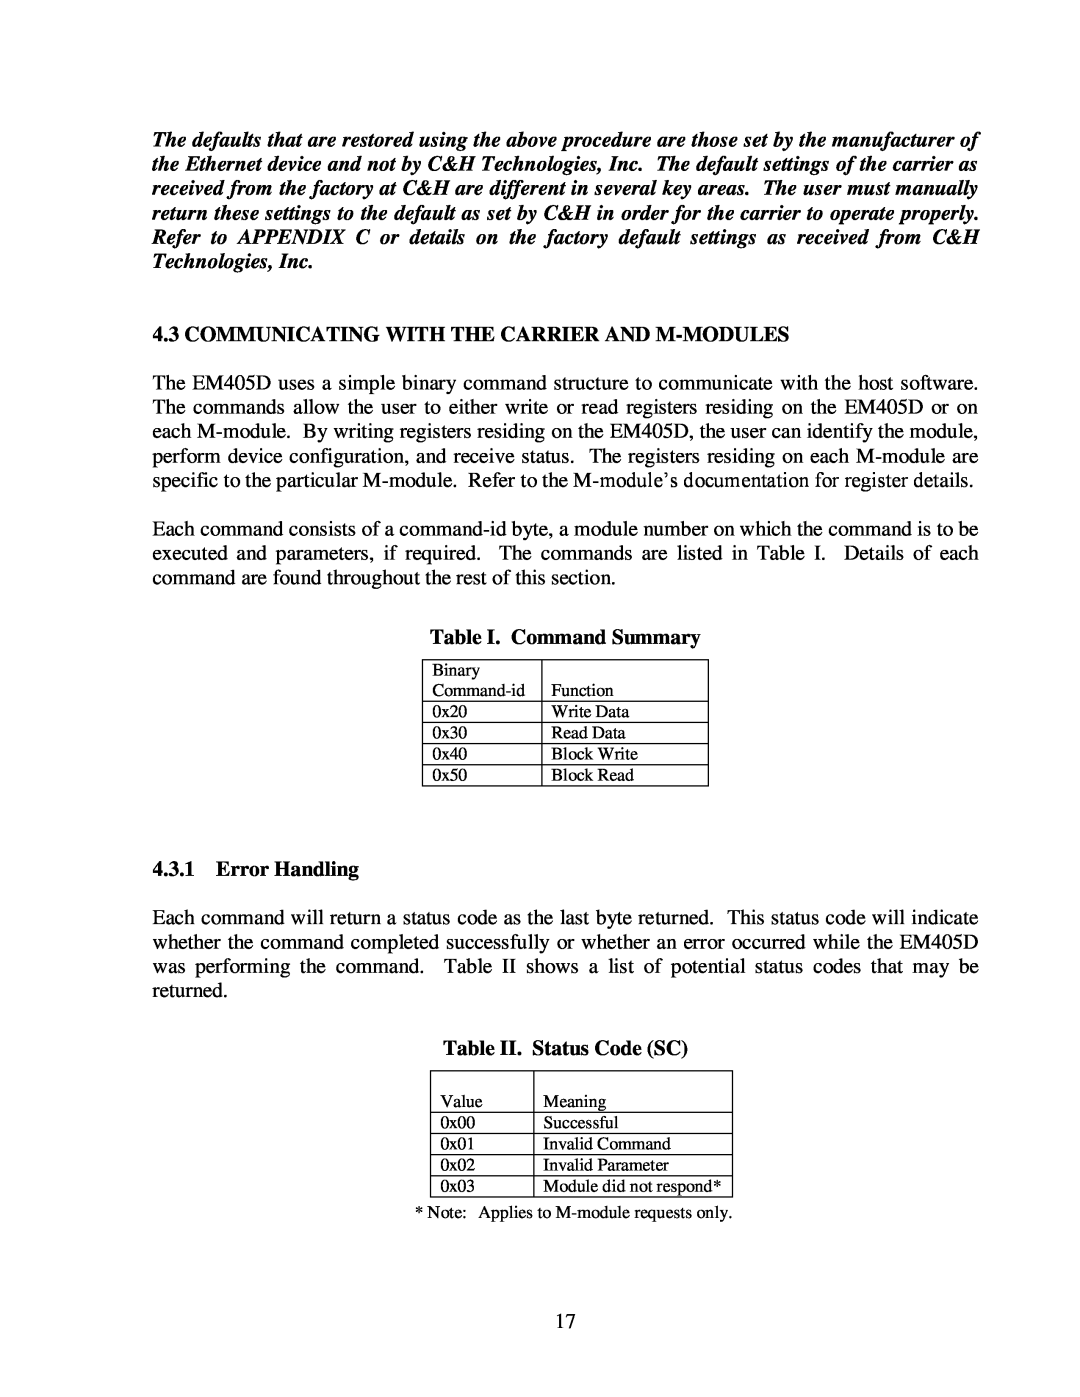 CH Tech EM405D user manual Communicating With The Carrier And M-Modules, Table I. Command Summary, Error Handling 